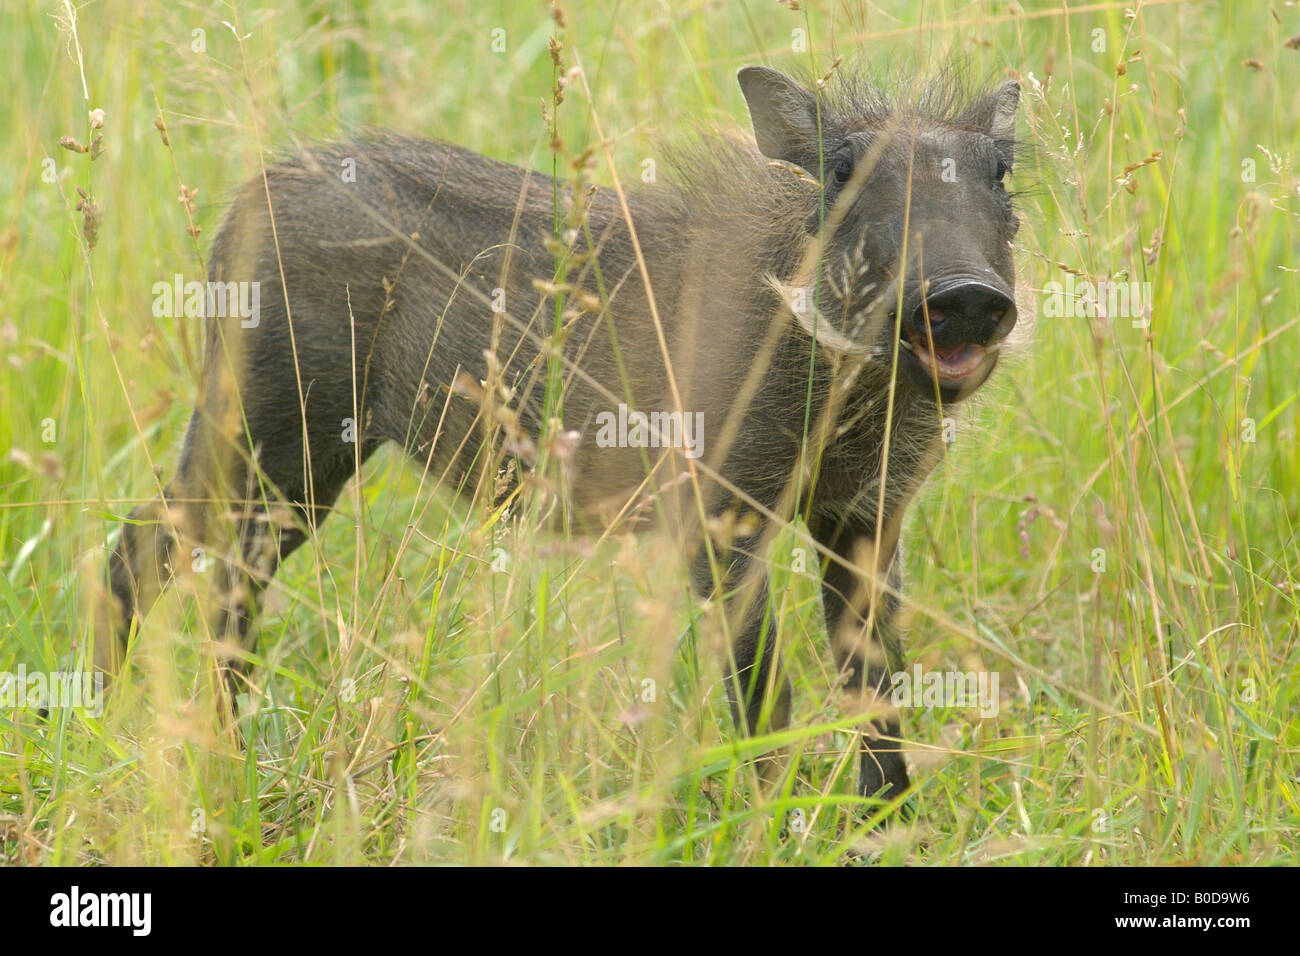 Southern Warthog Phacochoerus africanus sundevallii tusks grazers tubers rooting ivory small mammal hairy ugly cute adorable fun Stock Photo